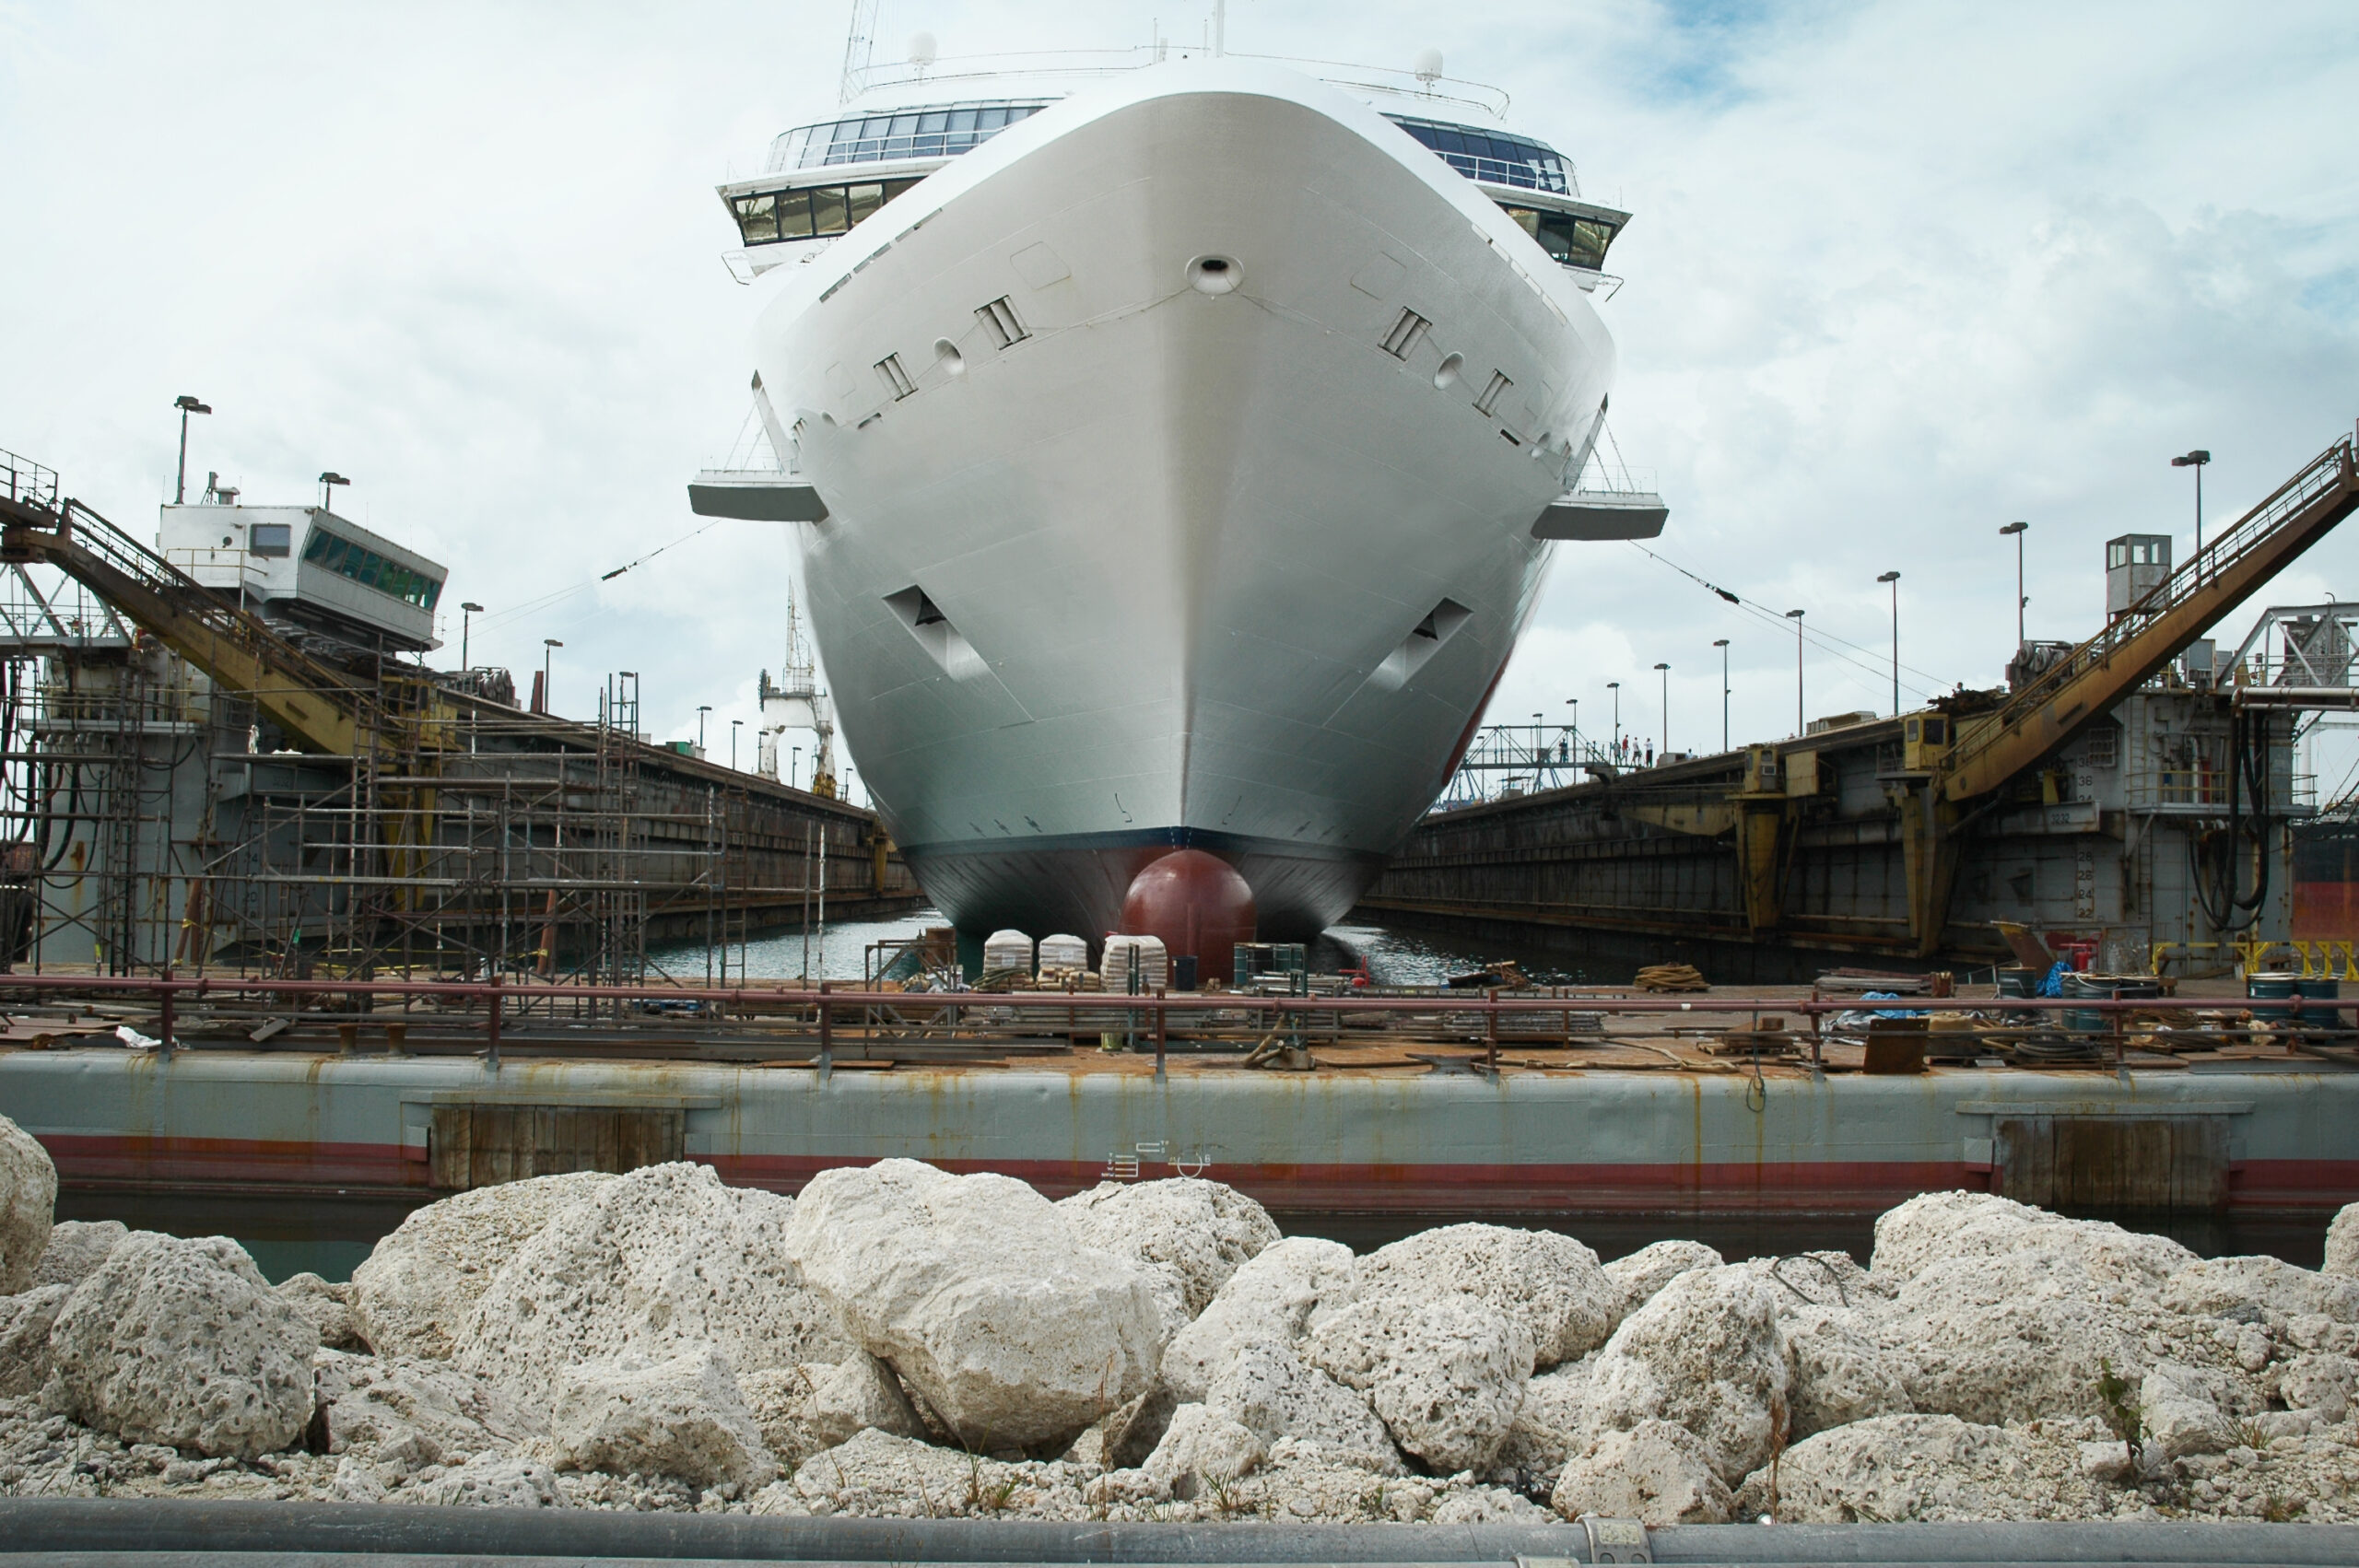 Cruise Ship Construction Locations: Where Are Cruise Ships Built?